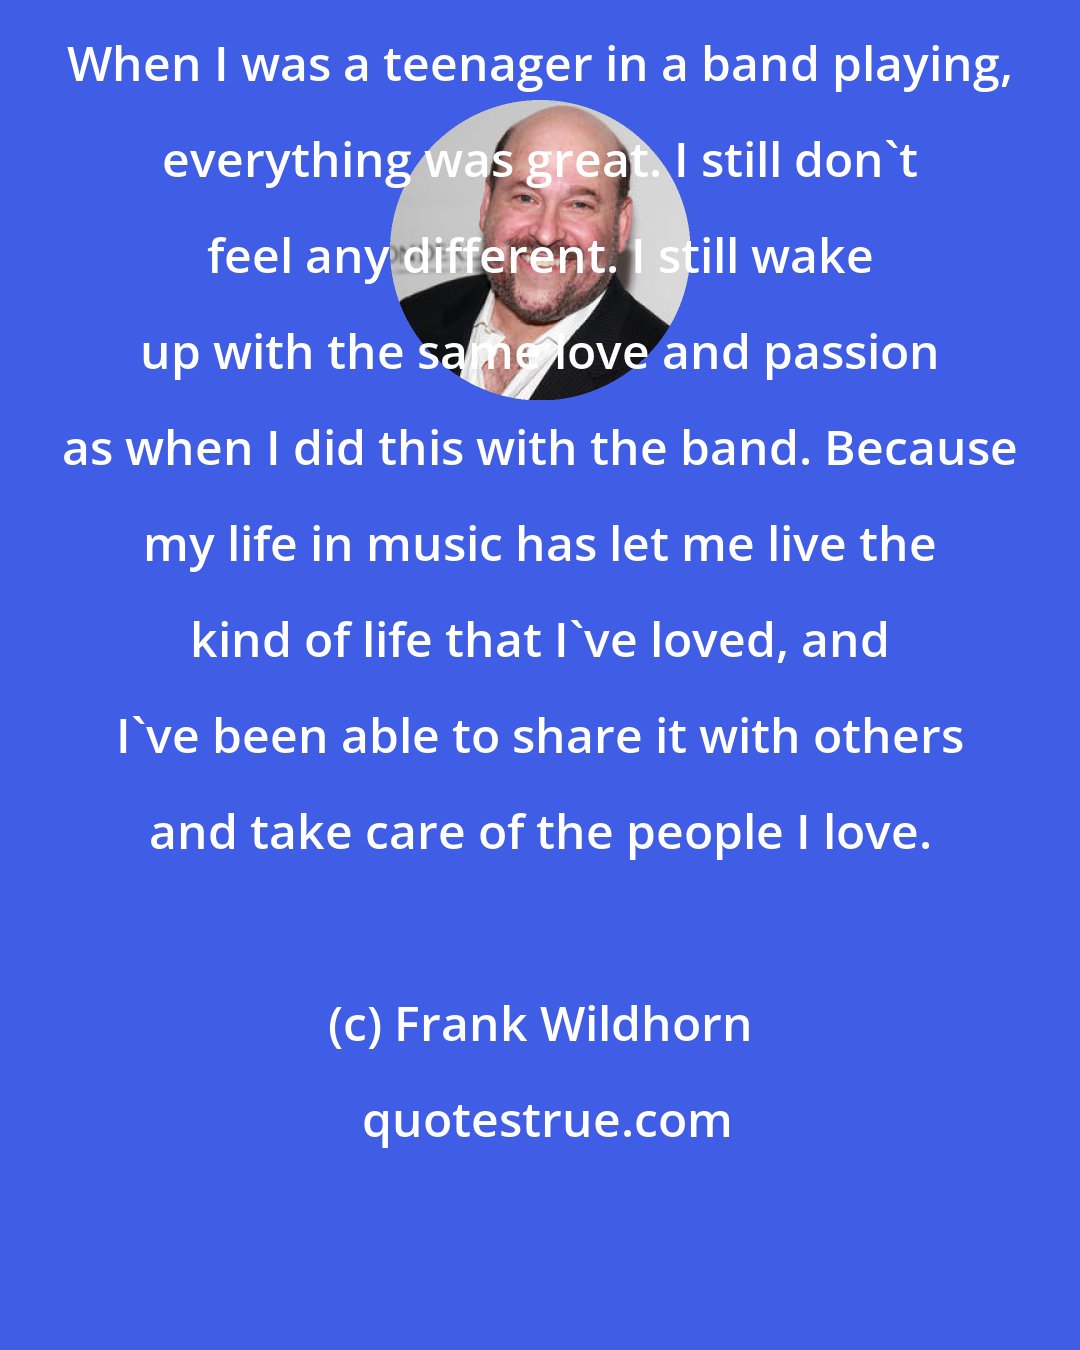 Frank Wildhorn: When I was a teenager in a band playing, everything was great. I still don't feel any different. I still wake up with the same love and passion as when I did this with the band. Because my life in music has let me live the kind of life that I've loved, and I've been able to share it with others and take care of the people I love.